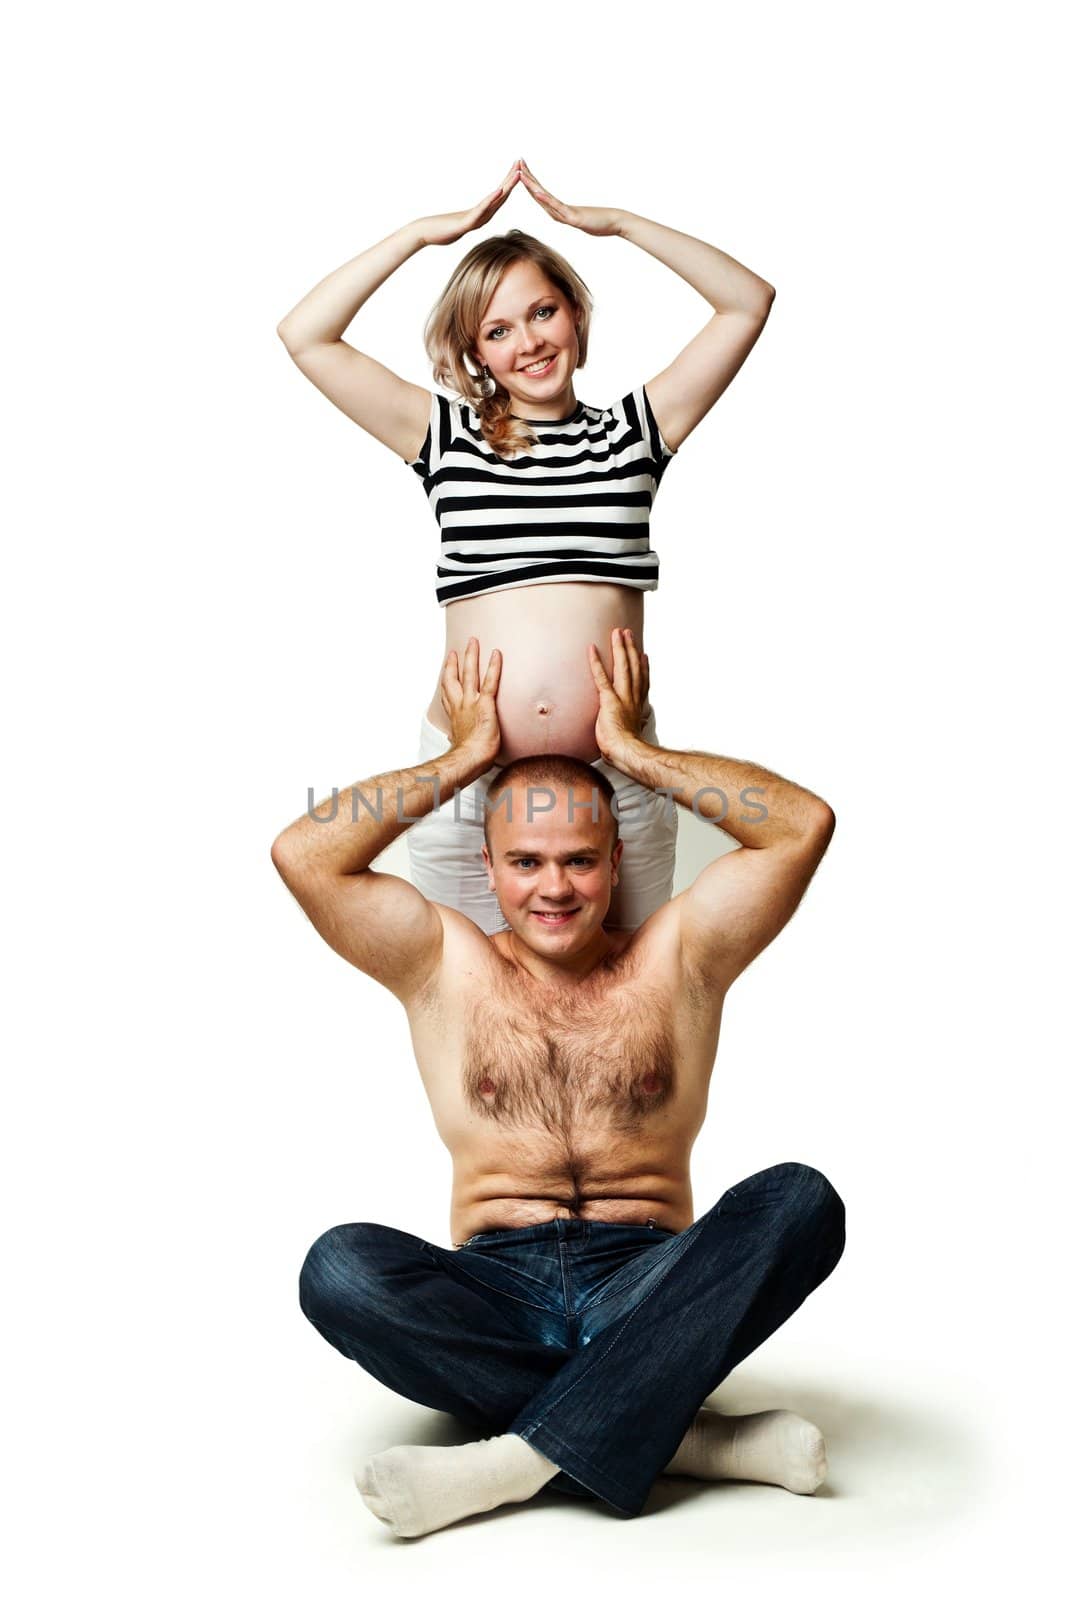 An image of a man supporting his pregnant wife